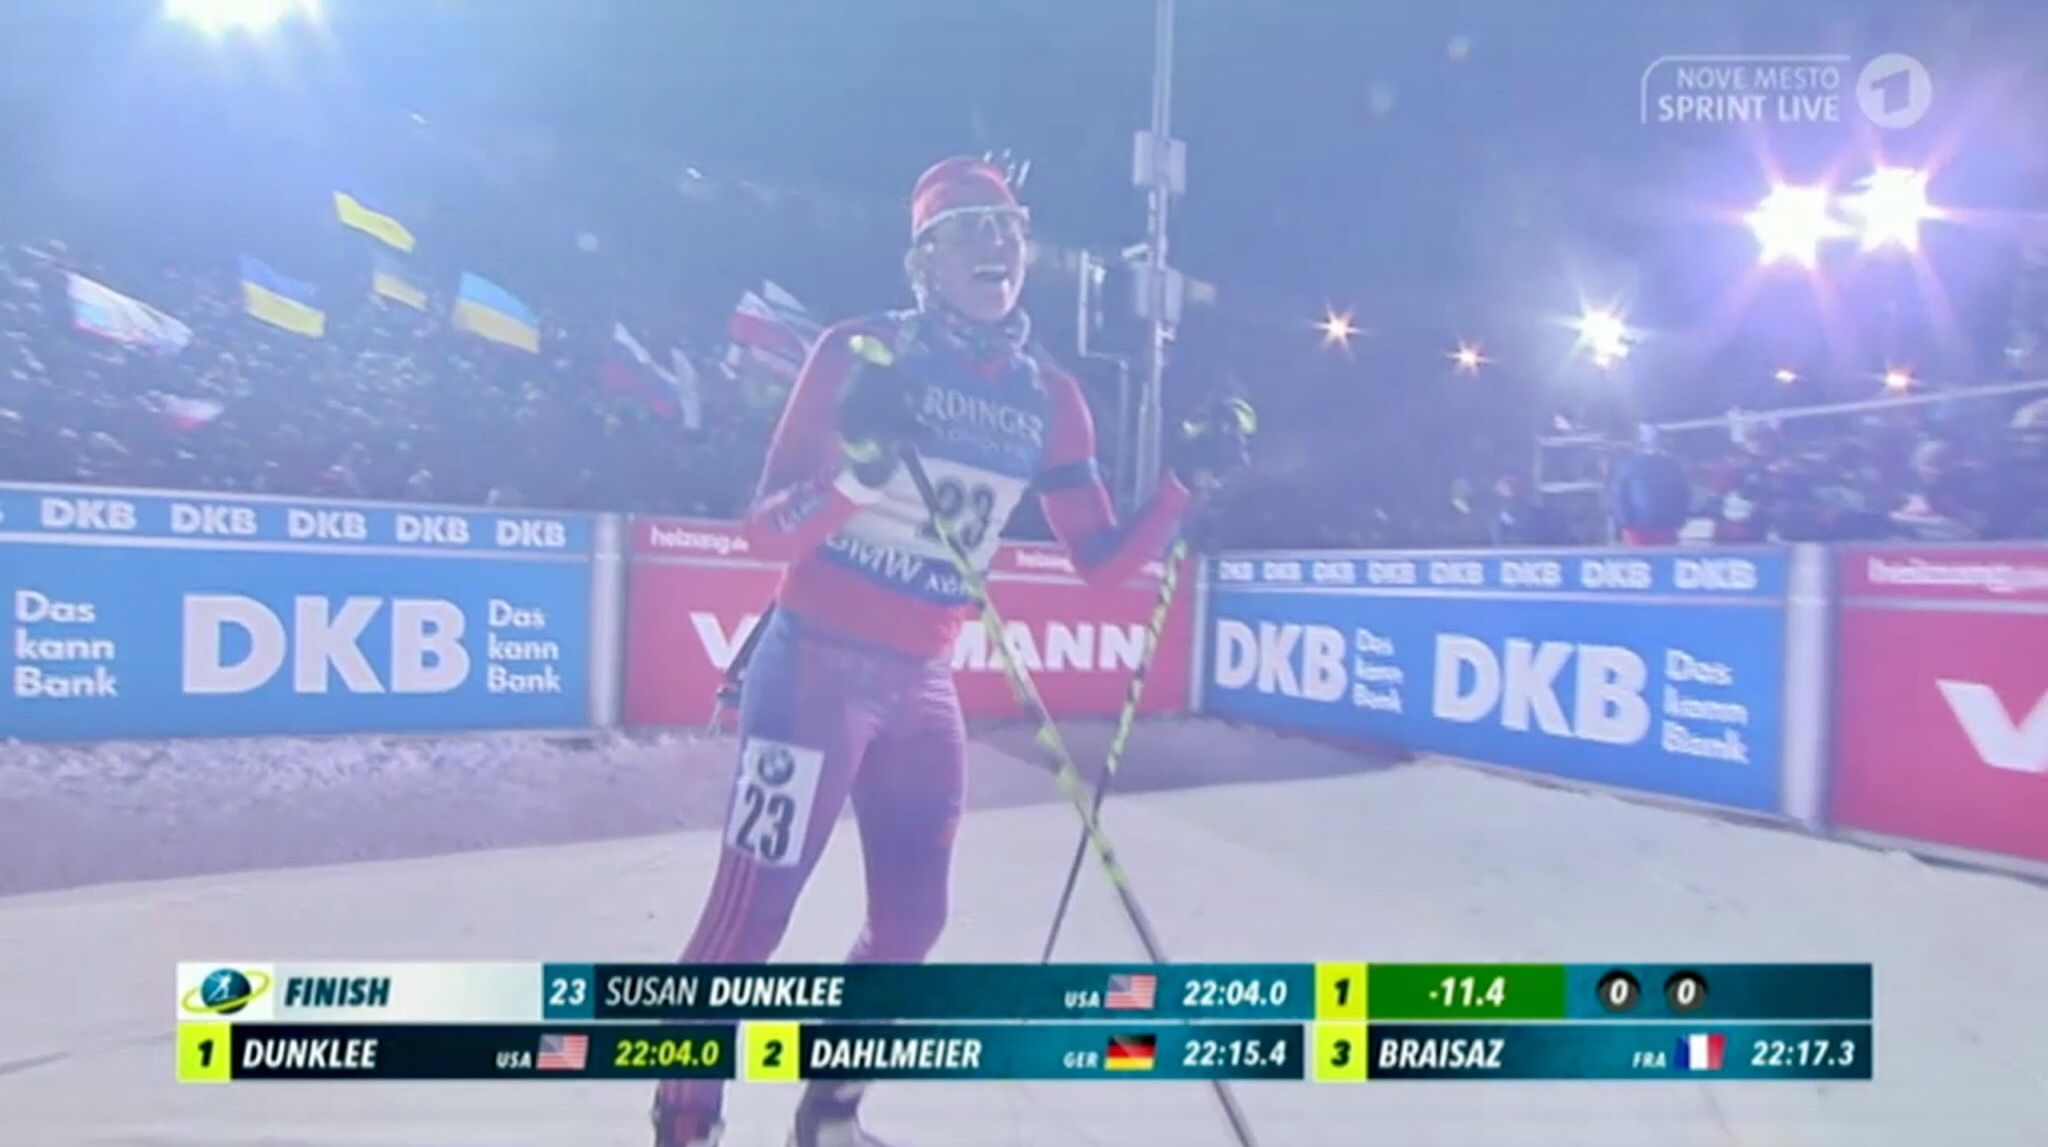 Susan Dunklee (US Biathlon) after crossing the finish first through 23 finishers in the women's 7.5 k sprint at the IBU World Cup in Nove Mesto, Czech Republic. She went on to place third for her first podium of the season and the third of her career. 